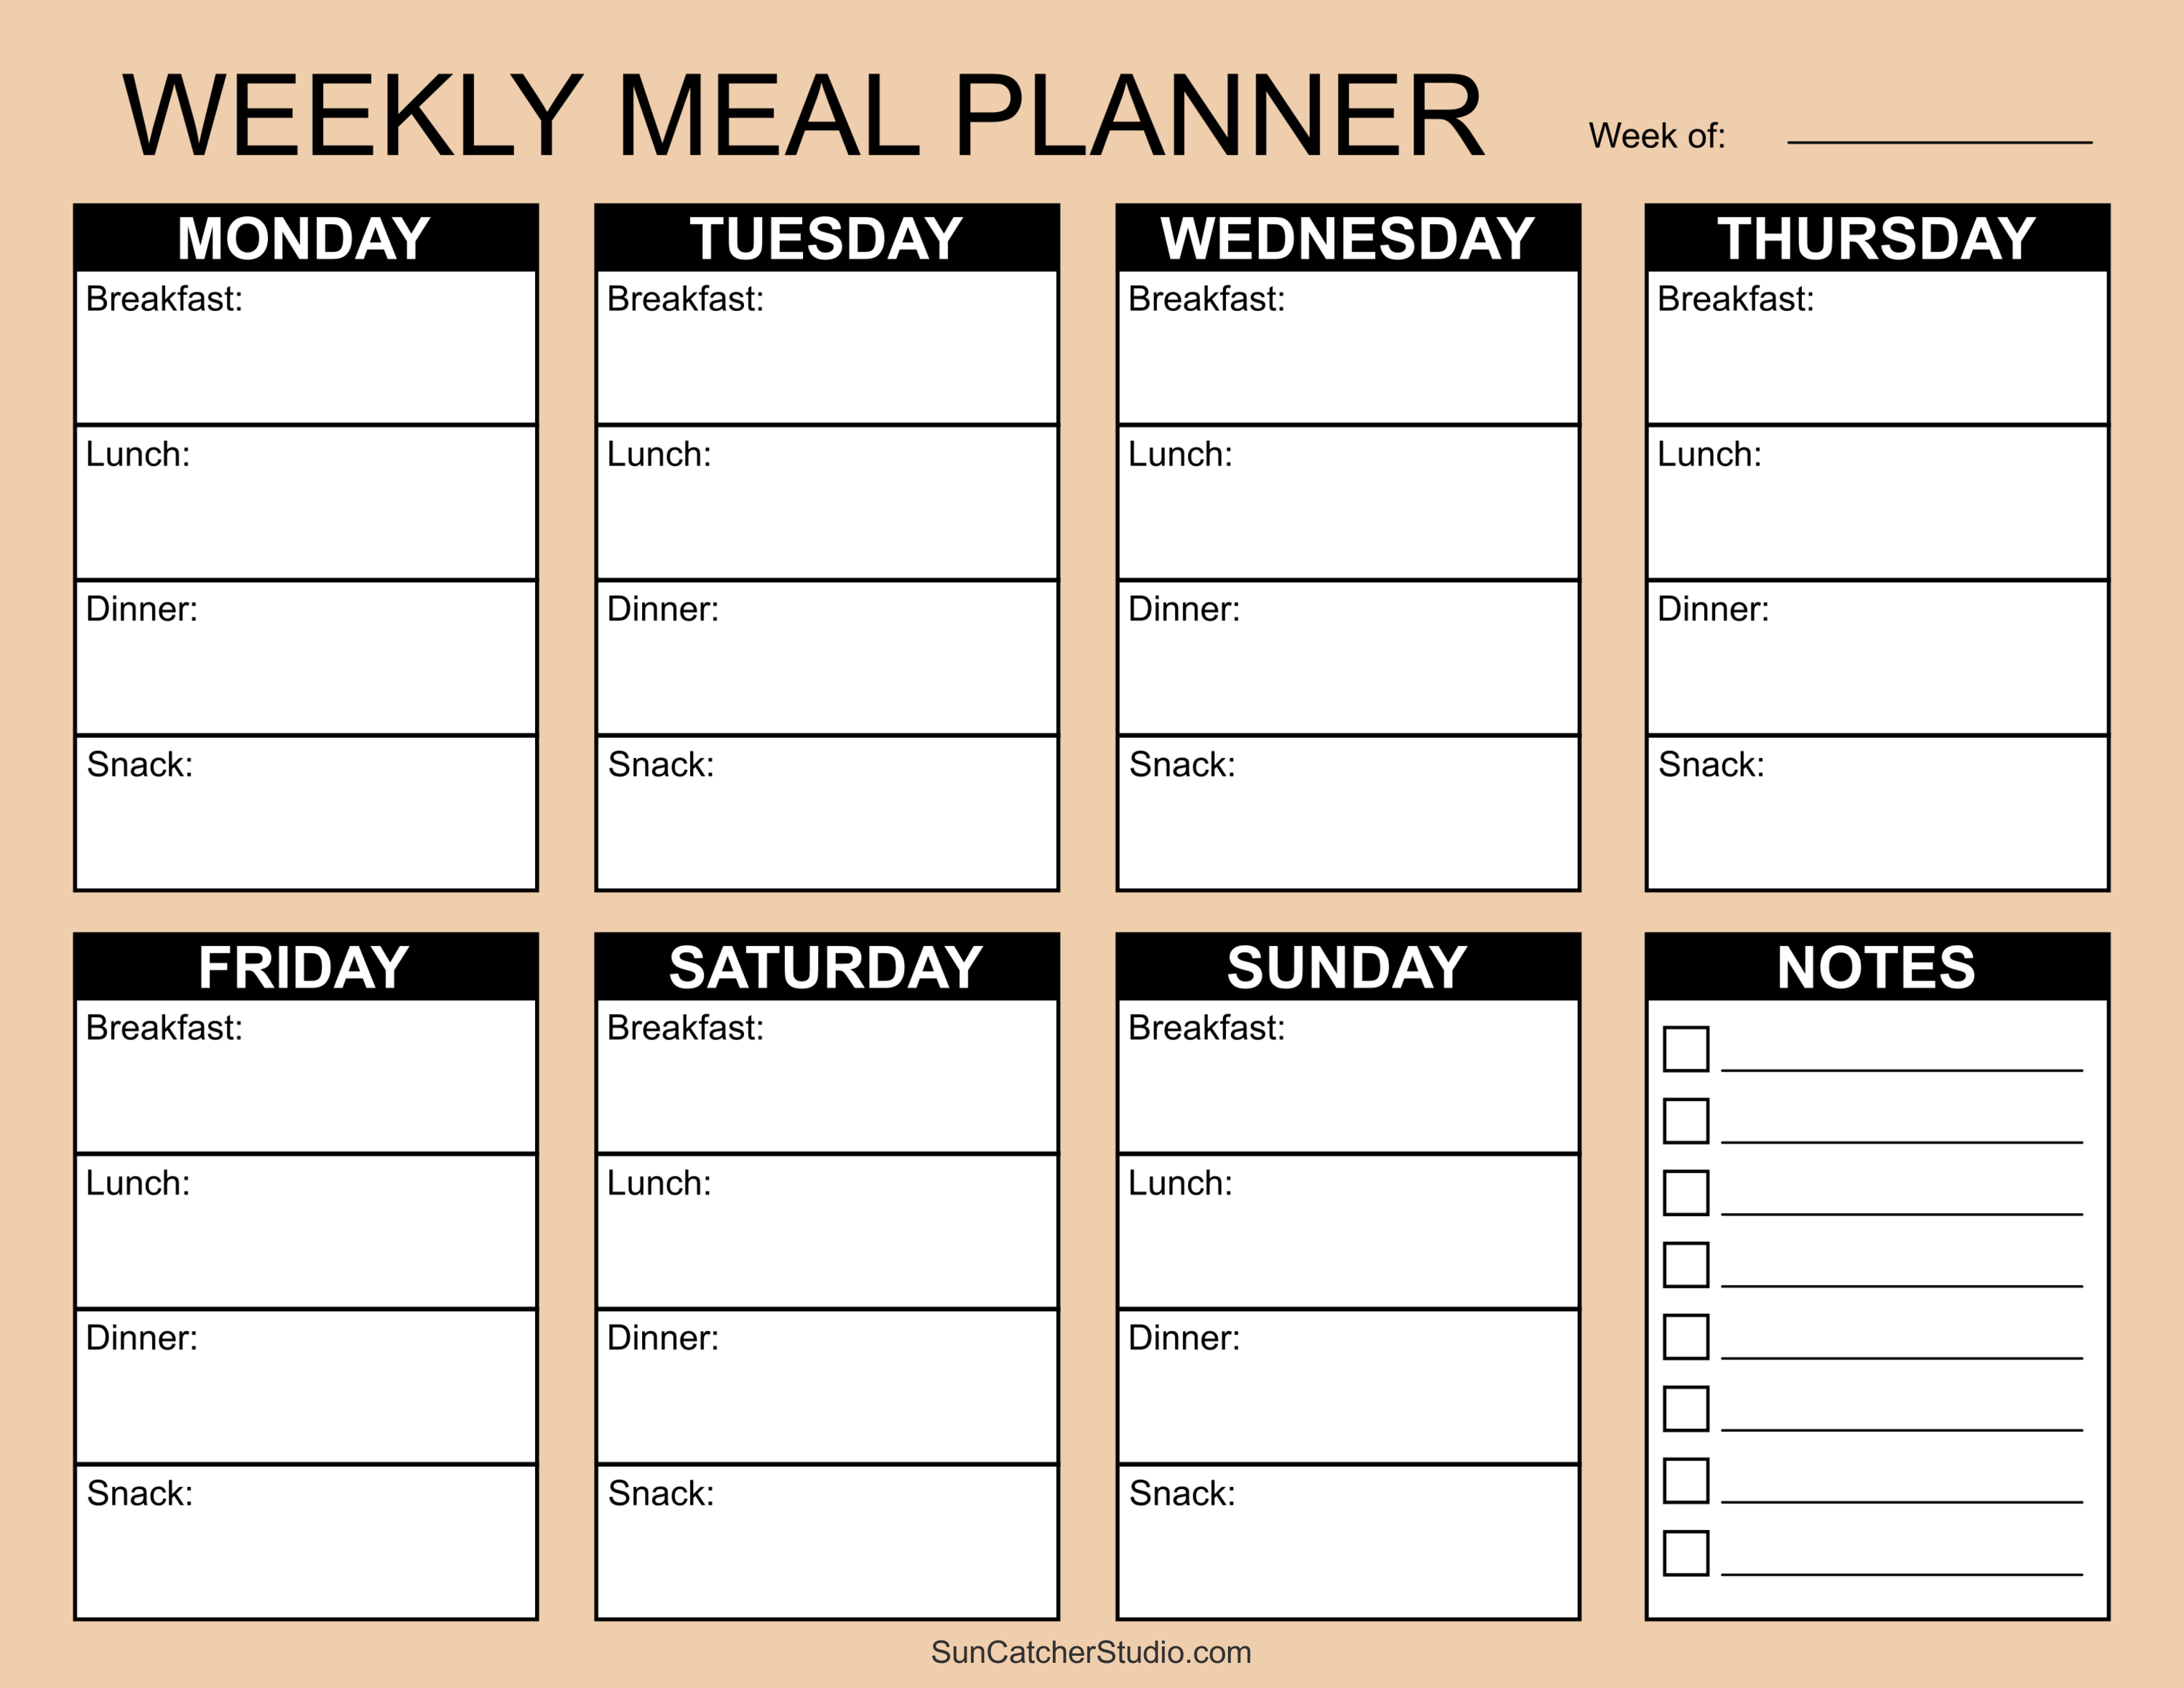 Weekly Meal Planner Poster - Weekly meal planner - desenio.com